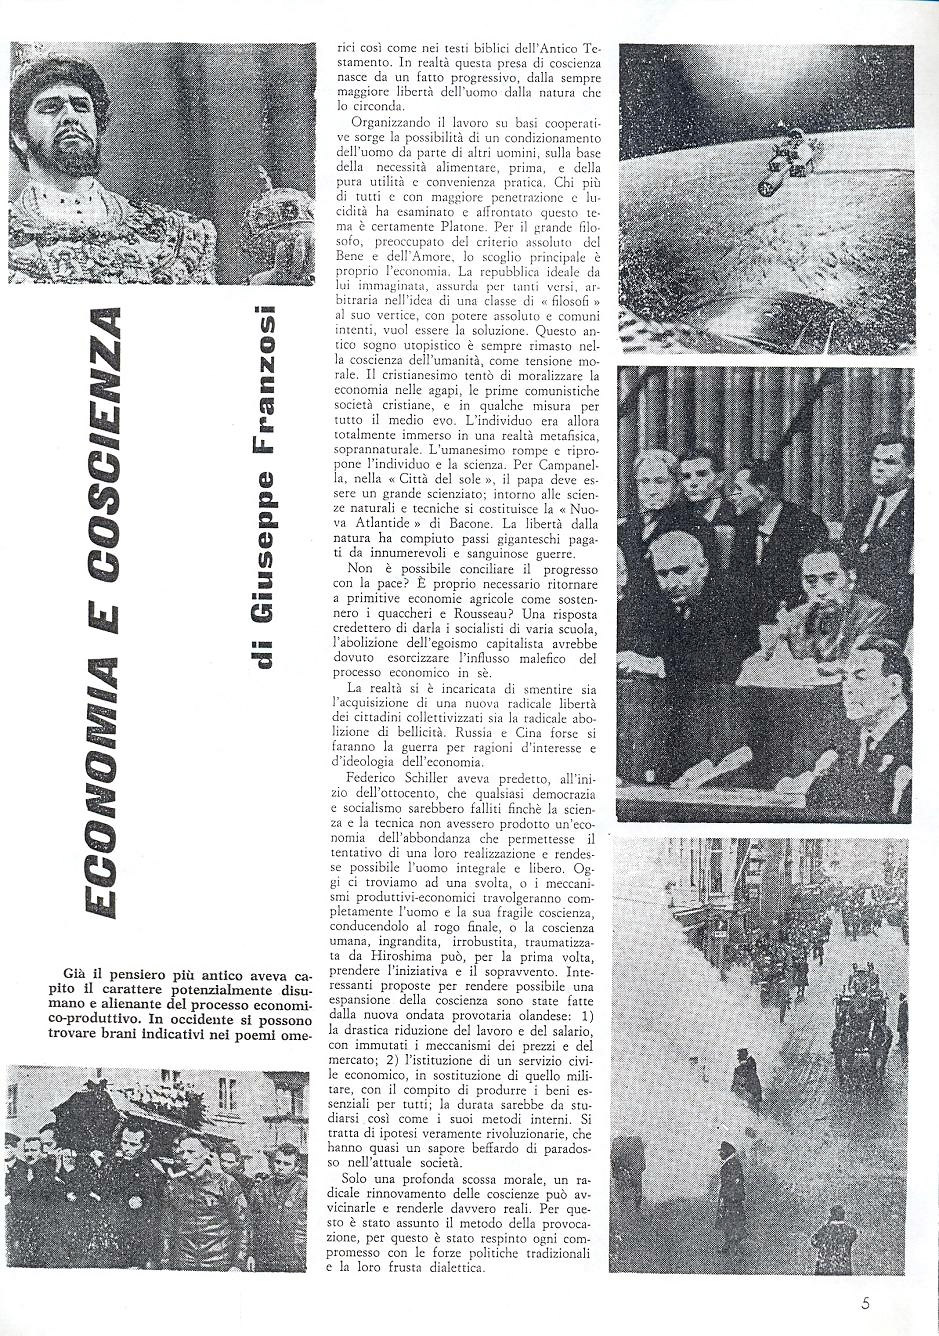 The fifth issue of Mondo Beat magazine - Edition 8,000 copies - Milan, April 30, 1967